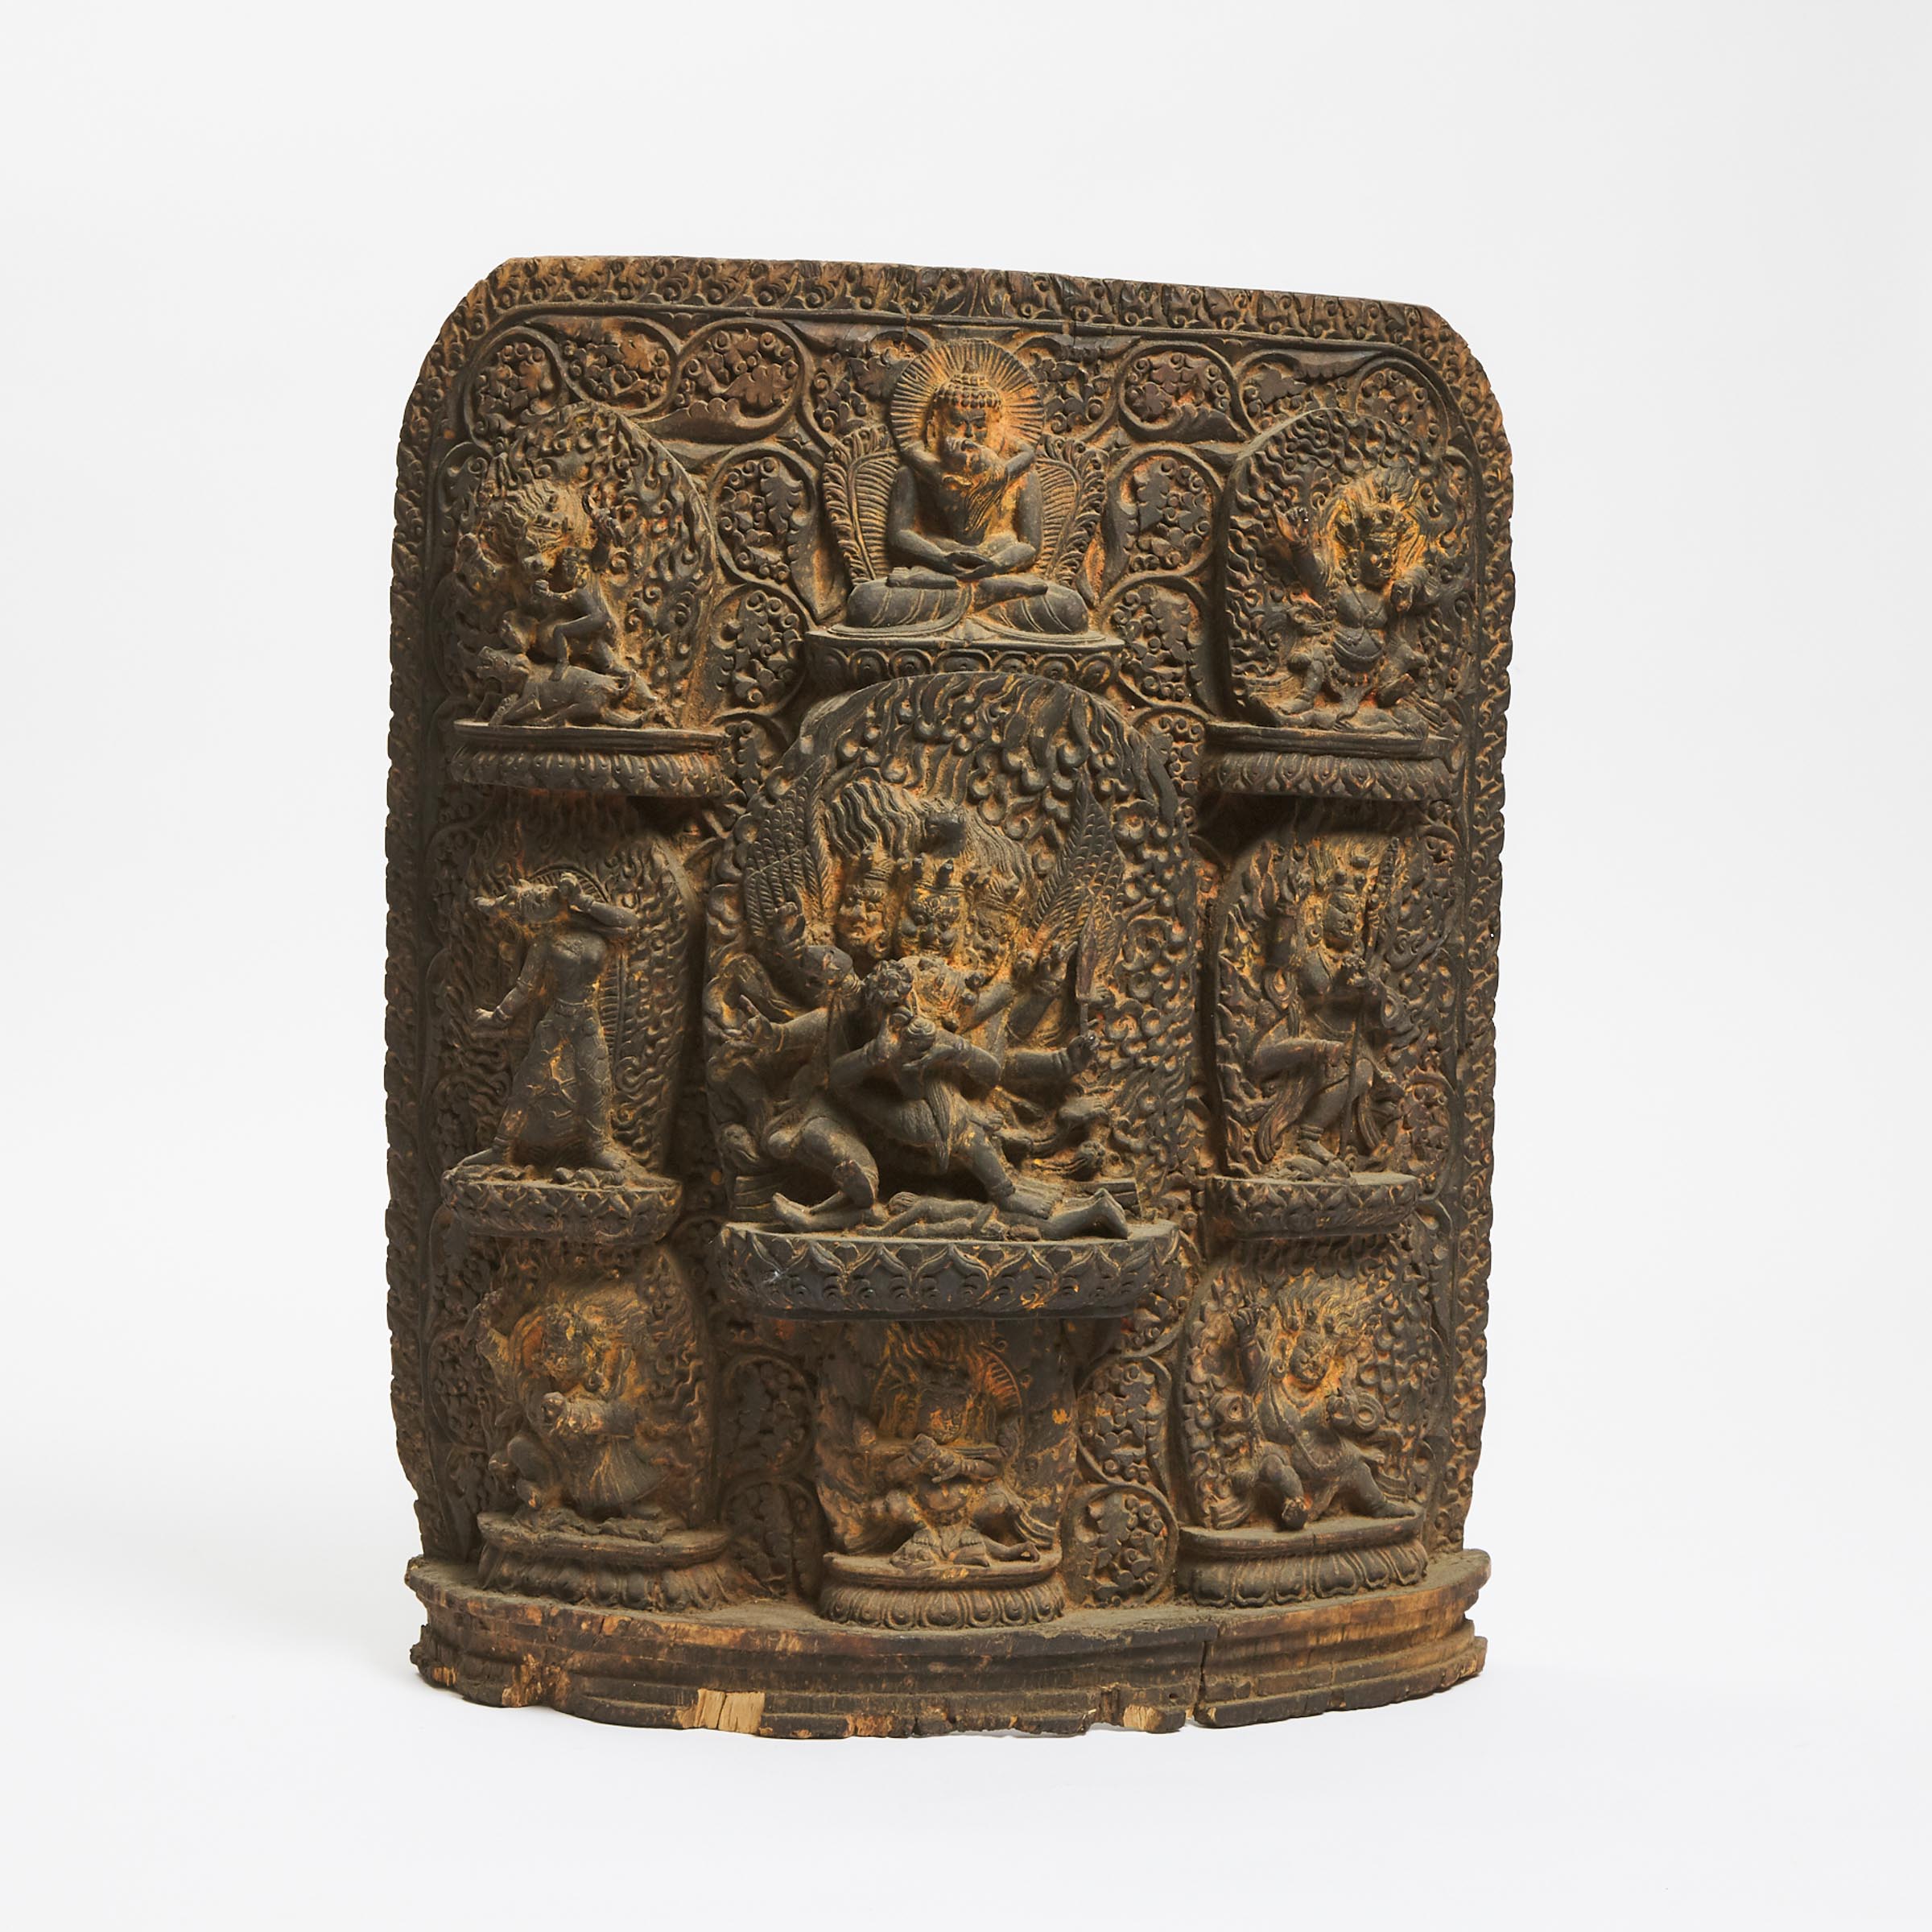 A Large Tibetan Wood Carved Relief, 19th Century